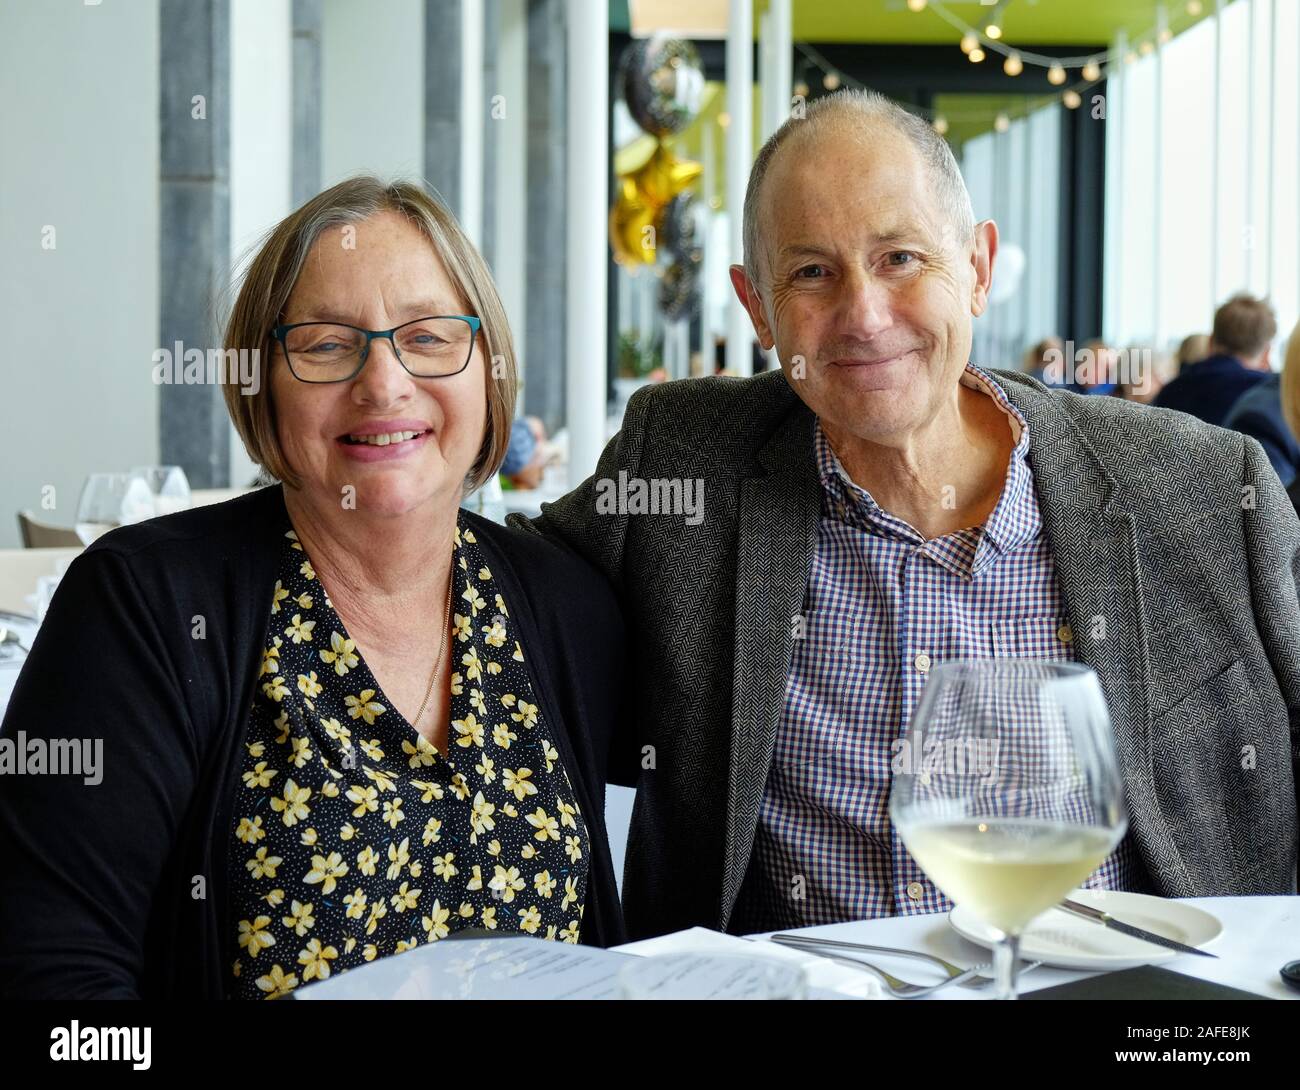 Middle age couple (seniors) dining out and having fun Stock Photo